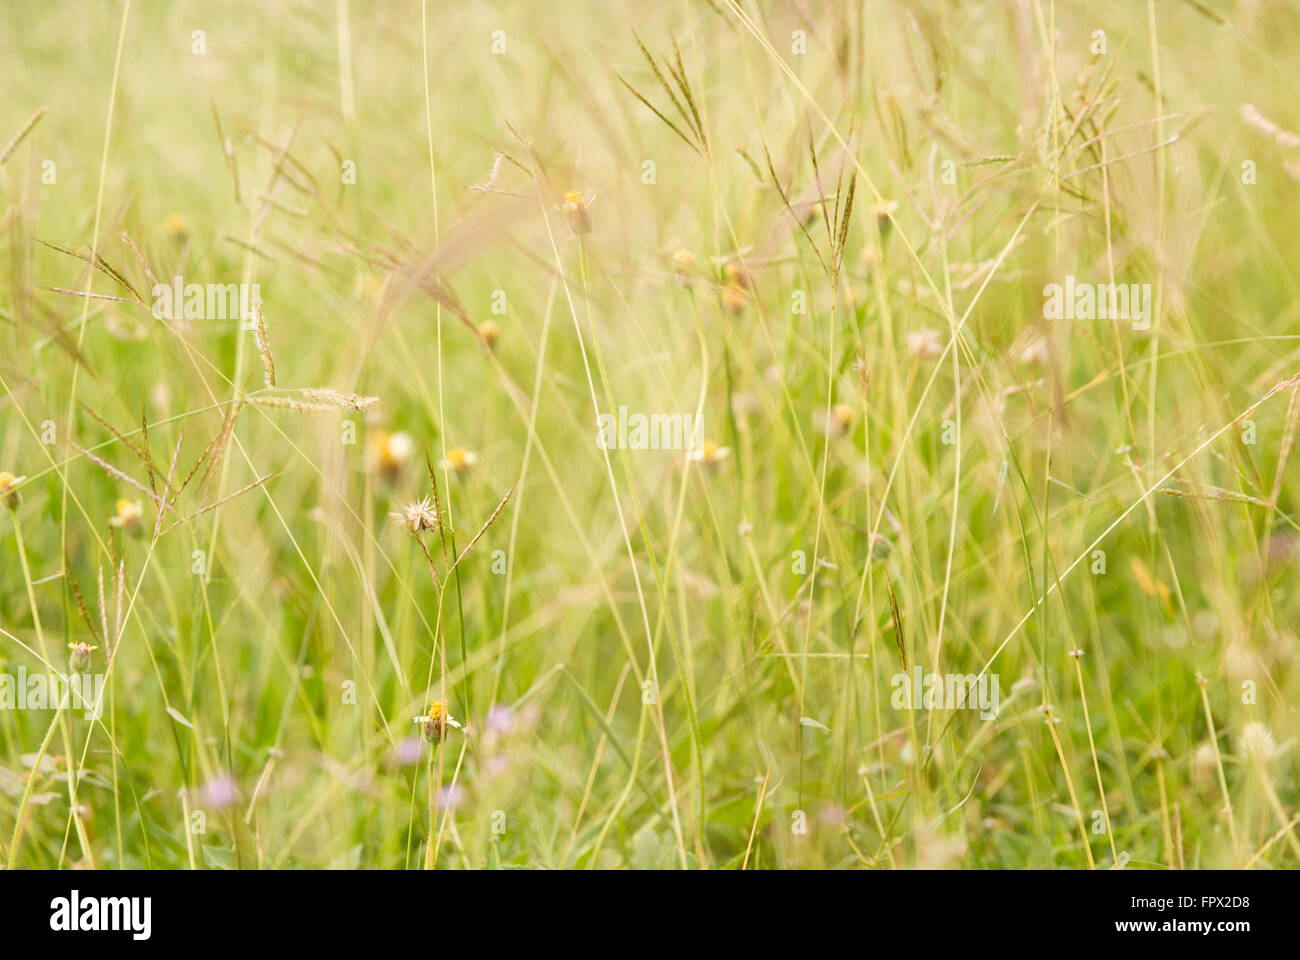 Long grass, weeds and wildflowers background Stock Photo